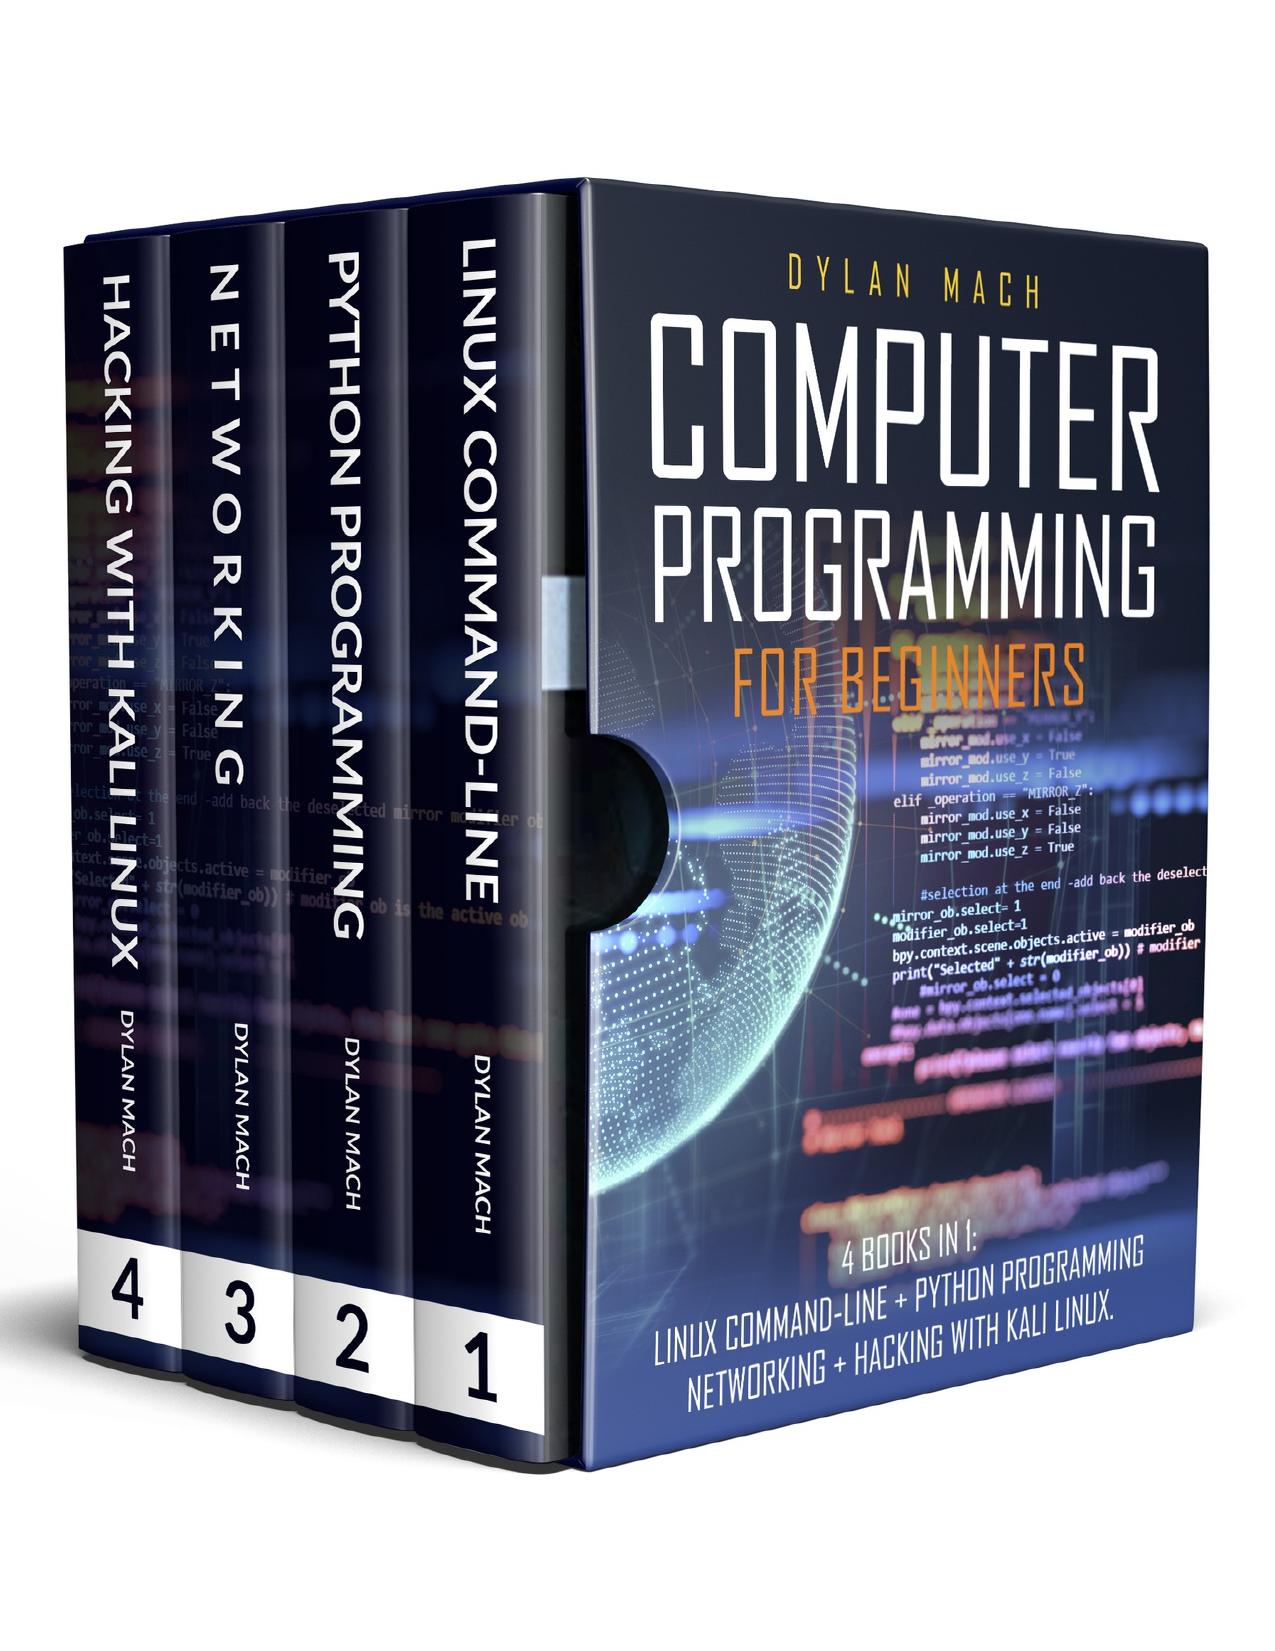 Computer Programming for Beginners: 4 Books in 1. Linux Command-Line + Python Programming + Networking + Hacking with Kali Linux. Cybersecurity, Wireless, LTE, Networks, and Penetration Testing